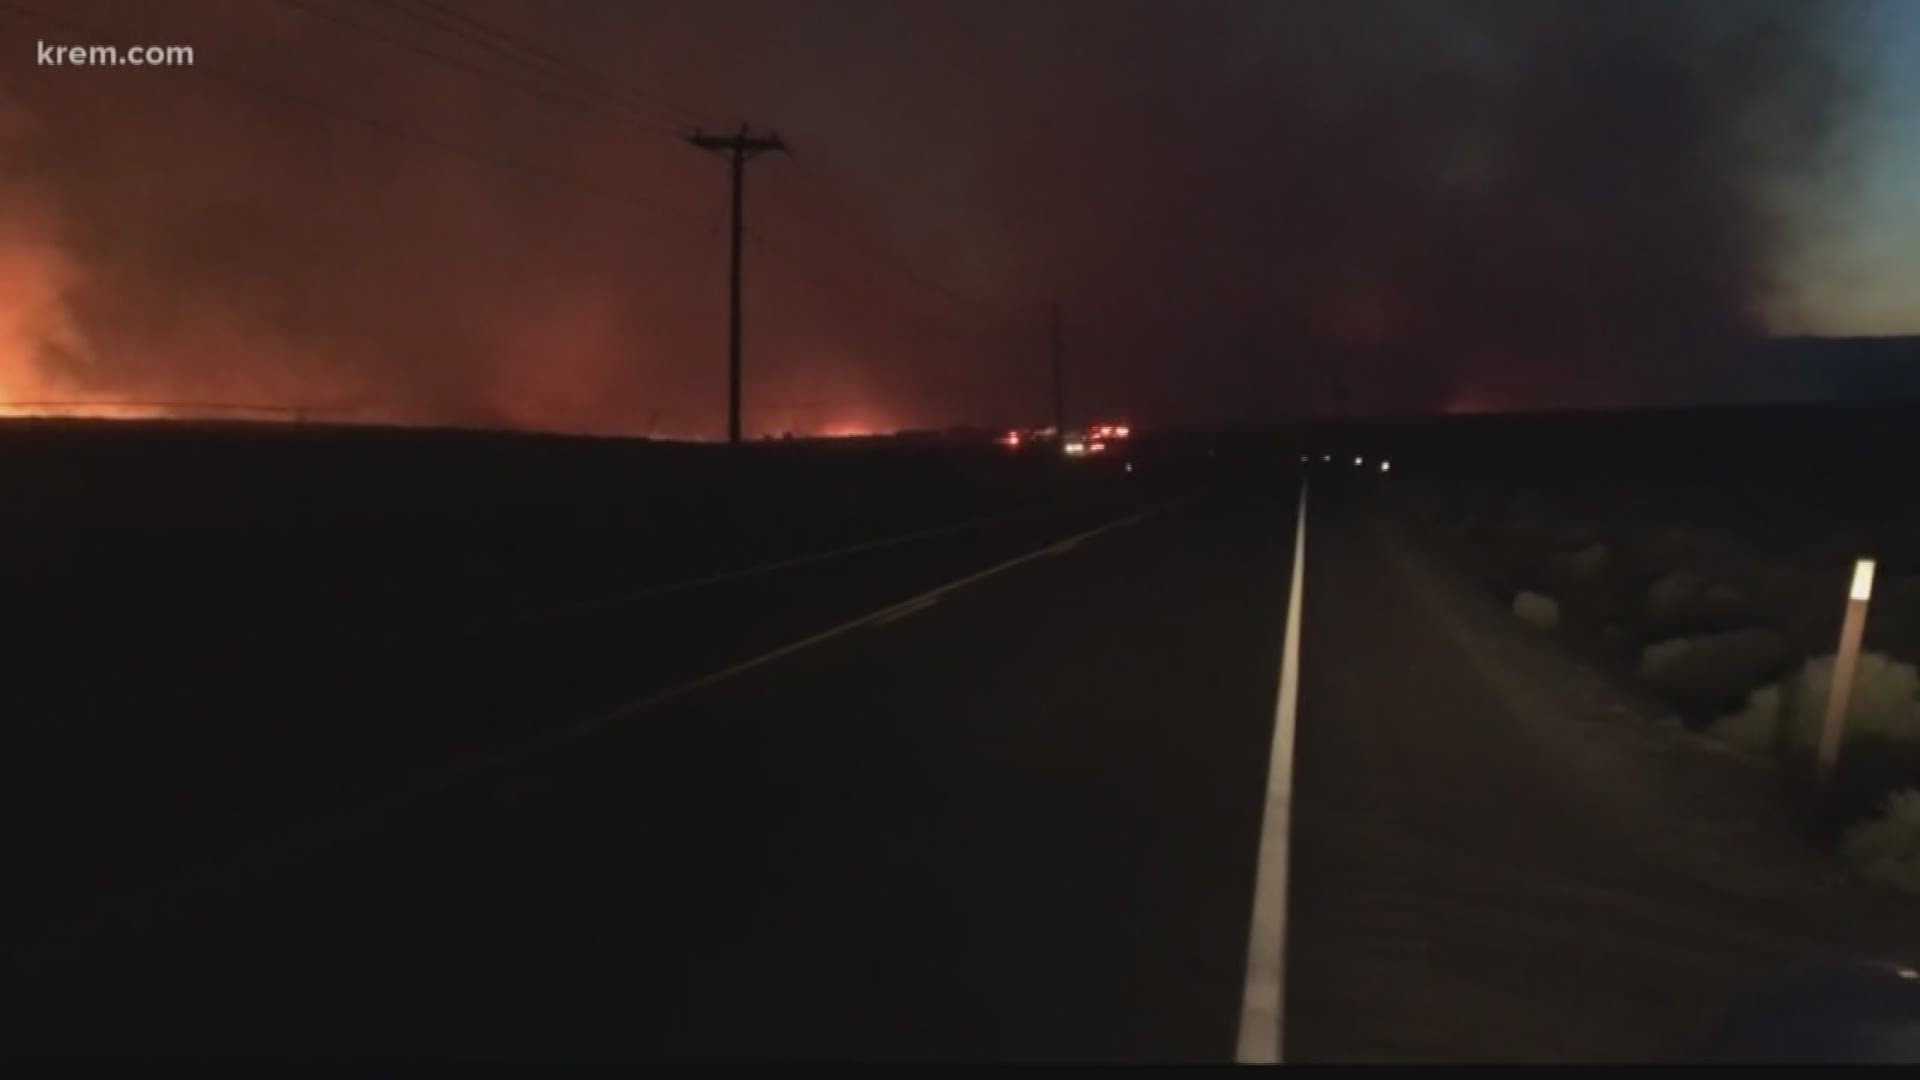 KREM Reporter Amanda Roley met with a landowner near the 243 Fire in Grant County and learned about how they dug fire lines around their property.